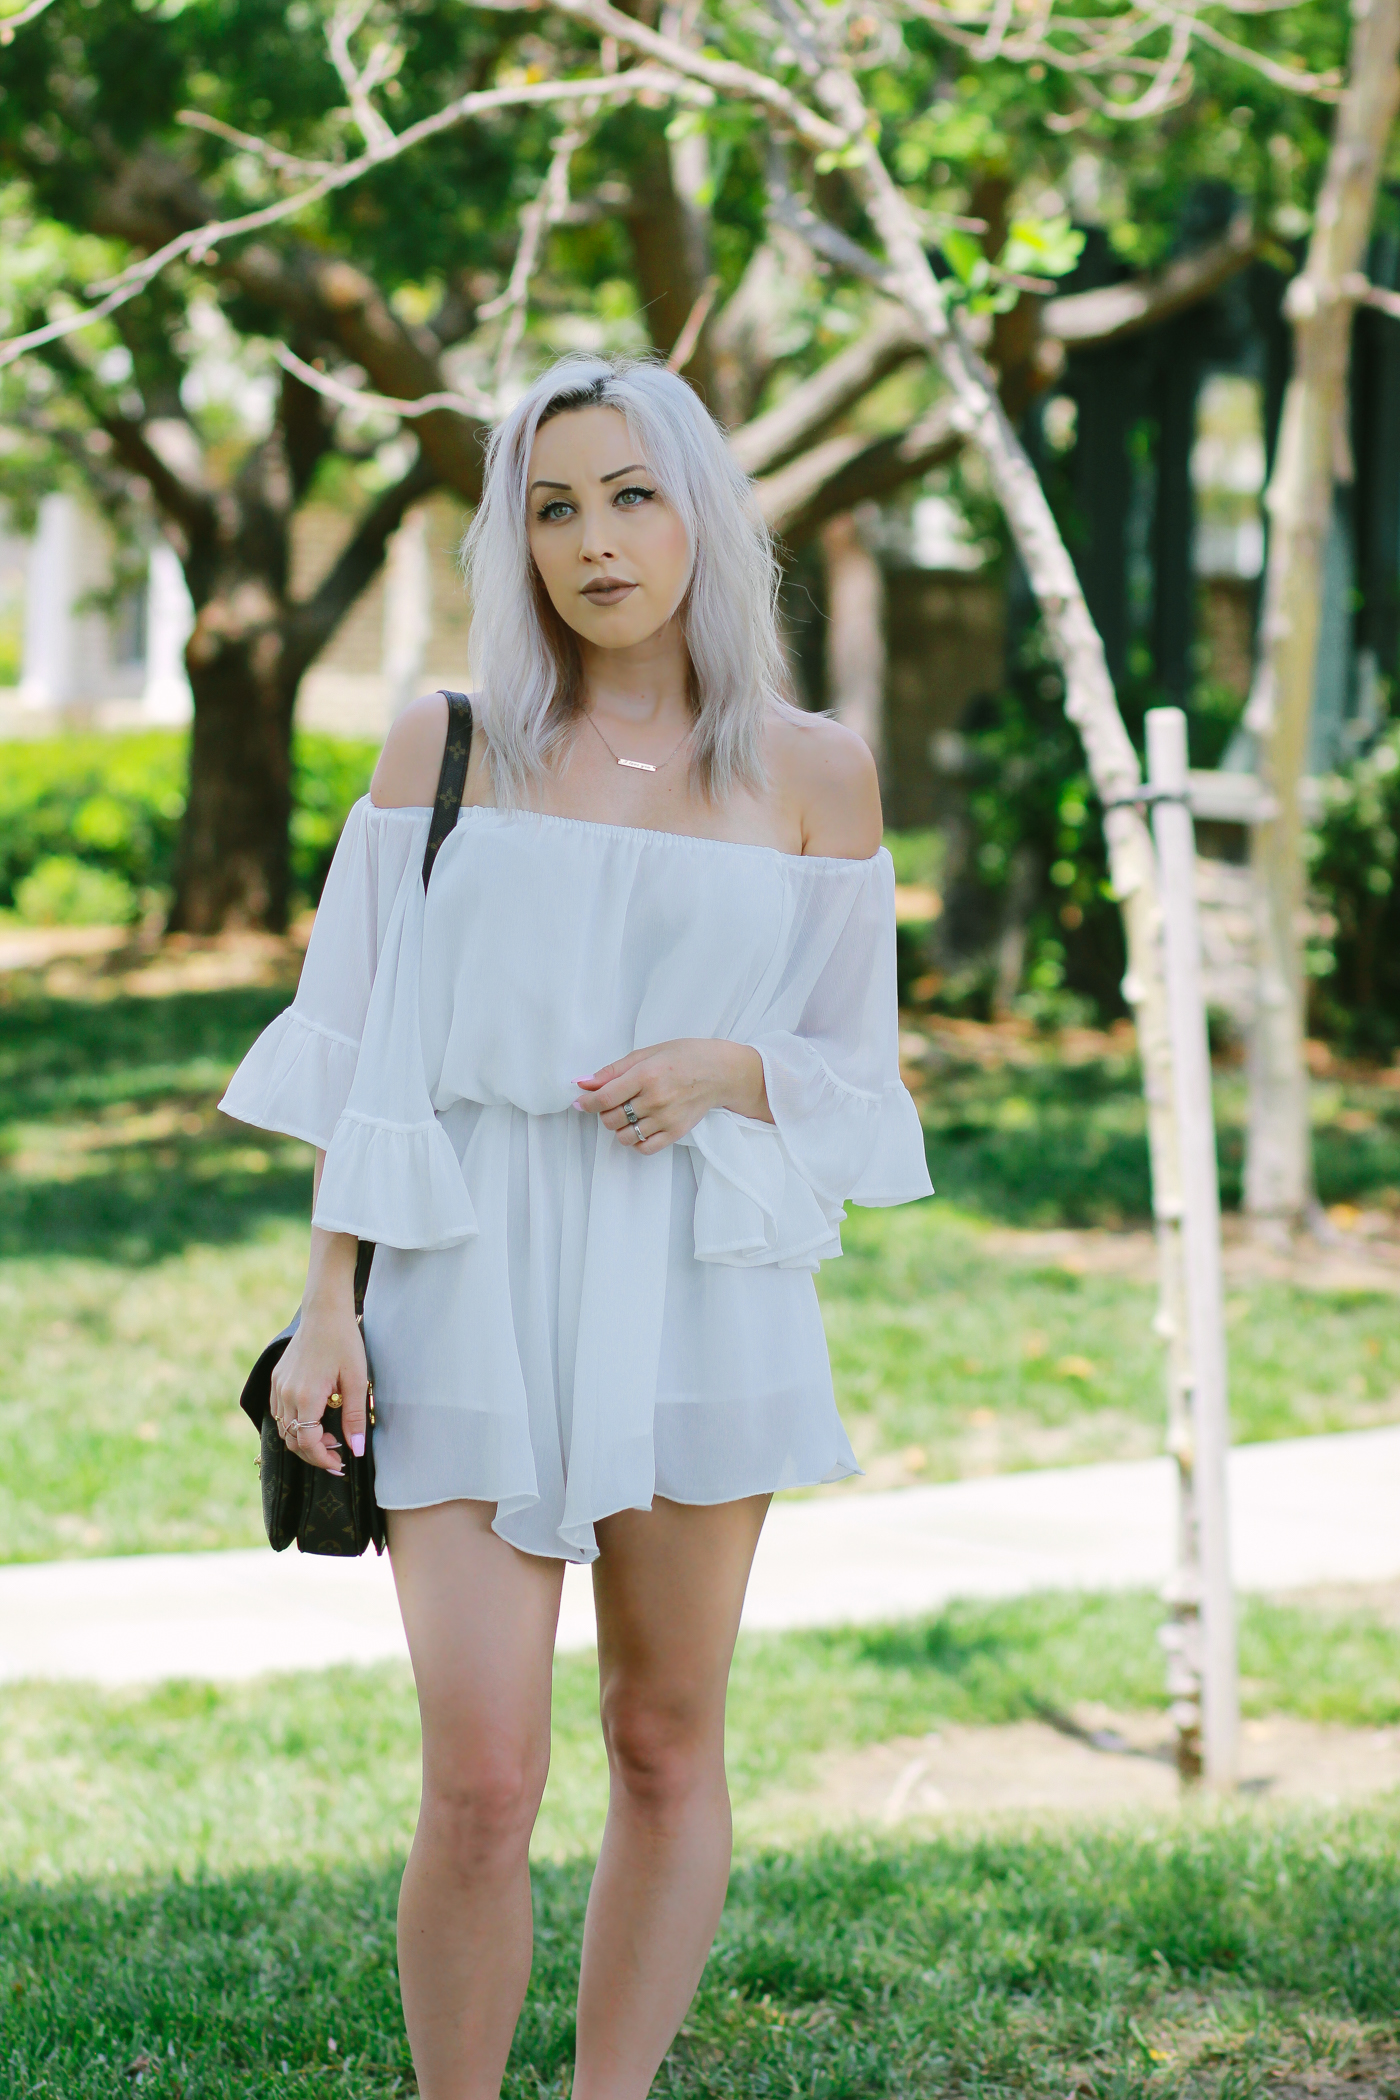 Blondie in the City | White Chiffon romper/playsuit from @chicwish | Brown Booties from @shoedazzle | Summer #OOTD